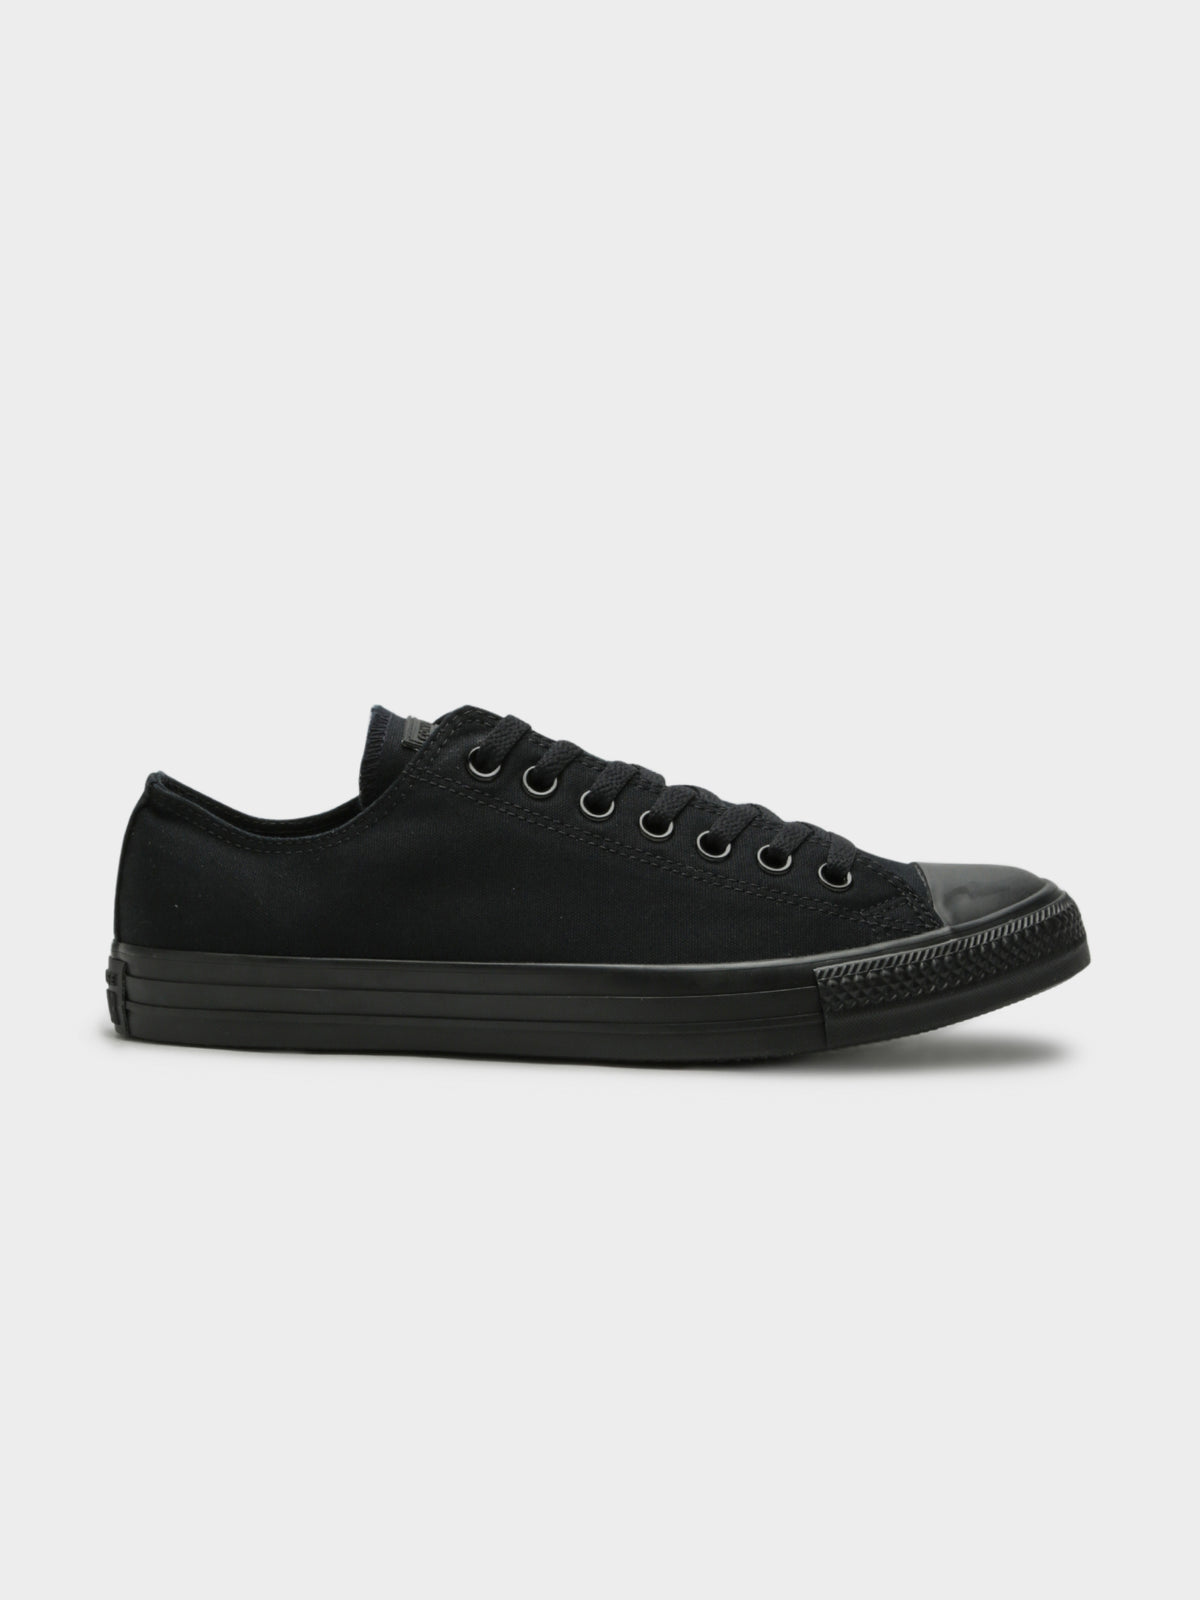 Unisex Chuck Taylor All Star Classic Low-Top Sneakers in Monochrome Ox Black